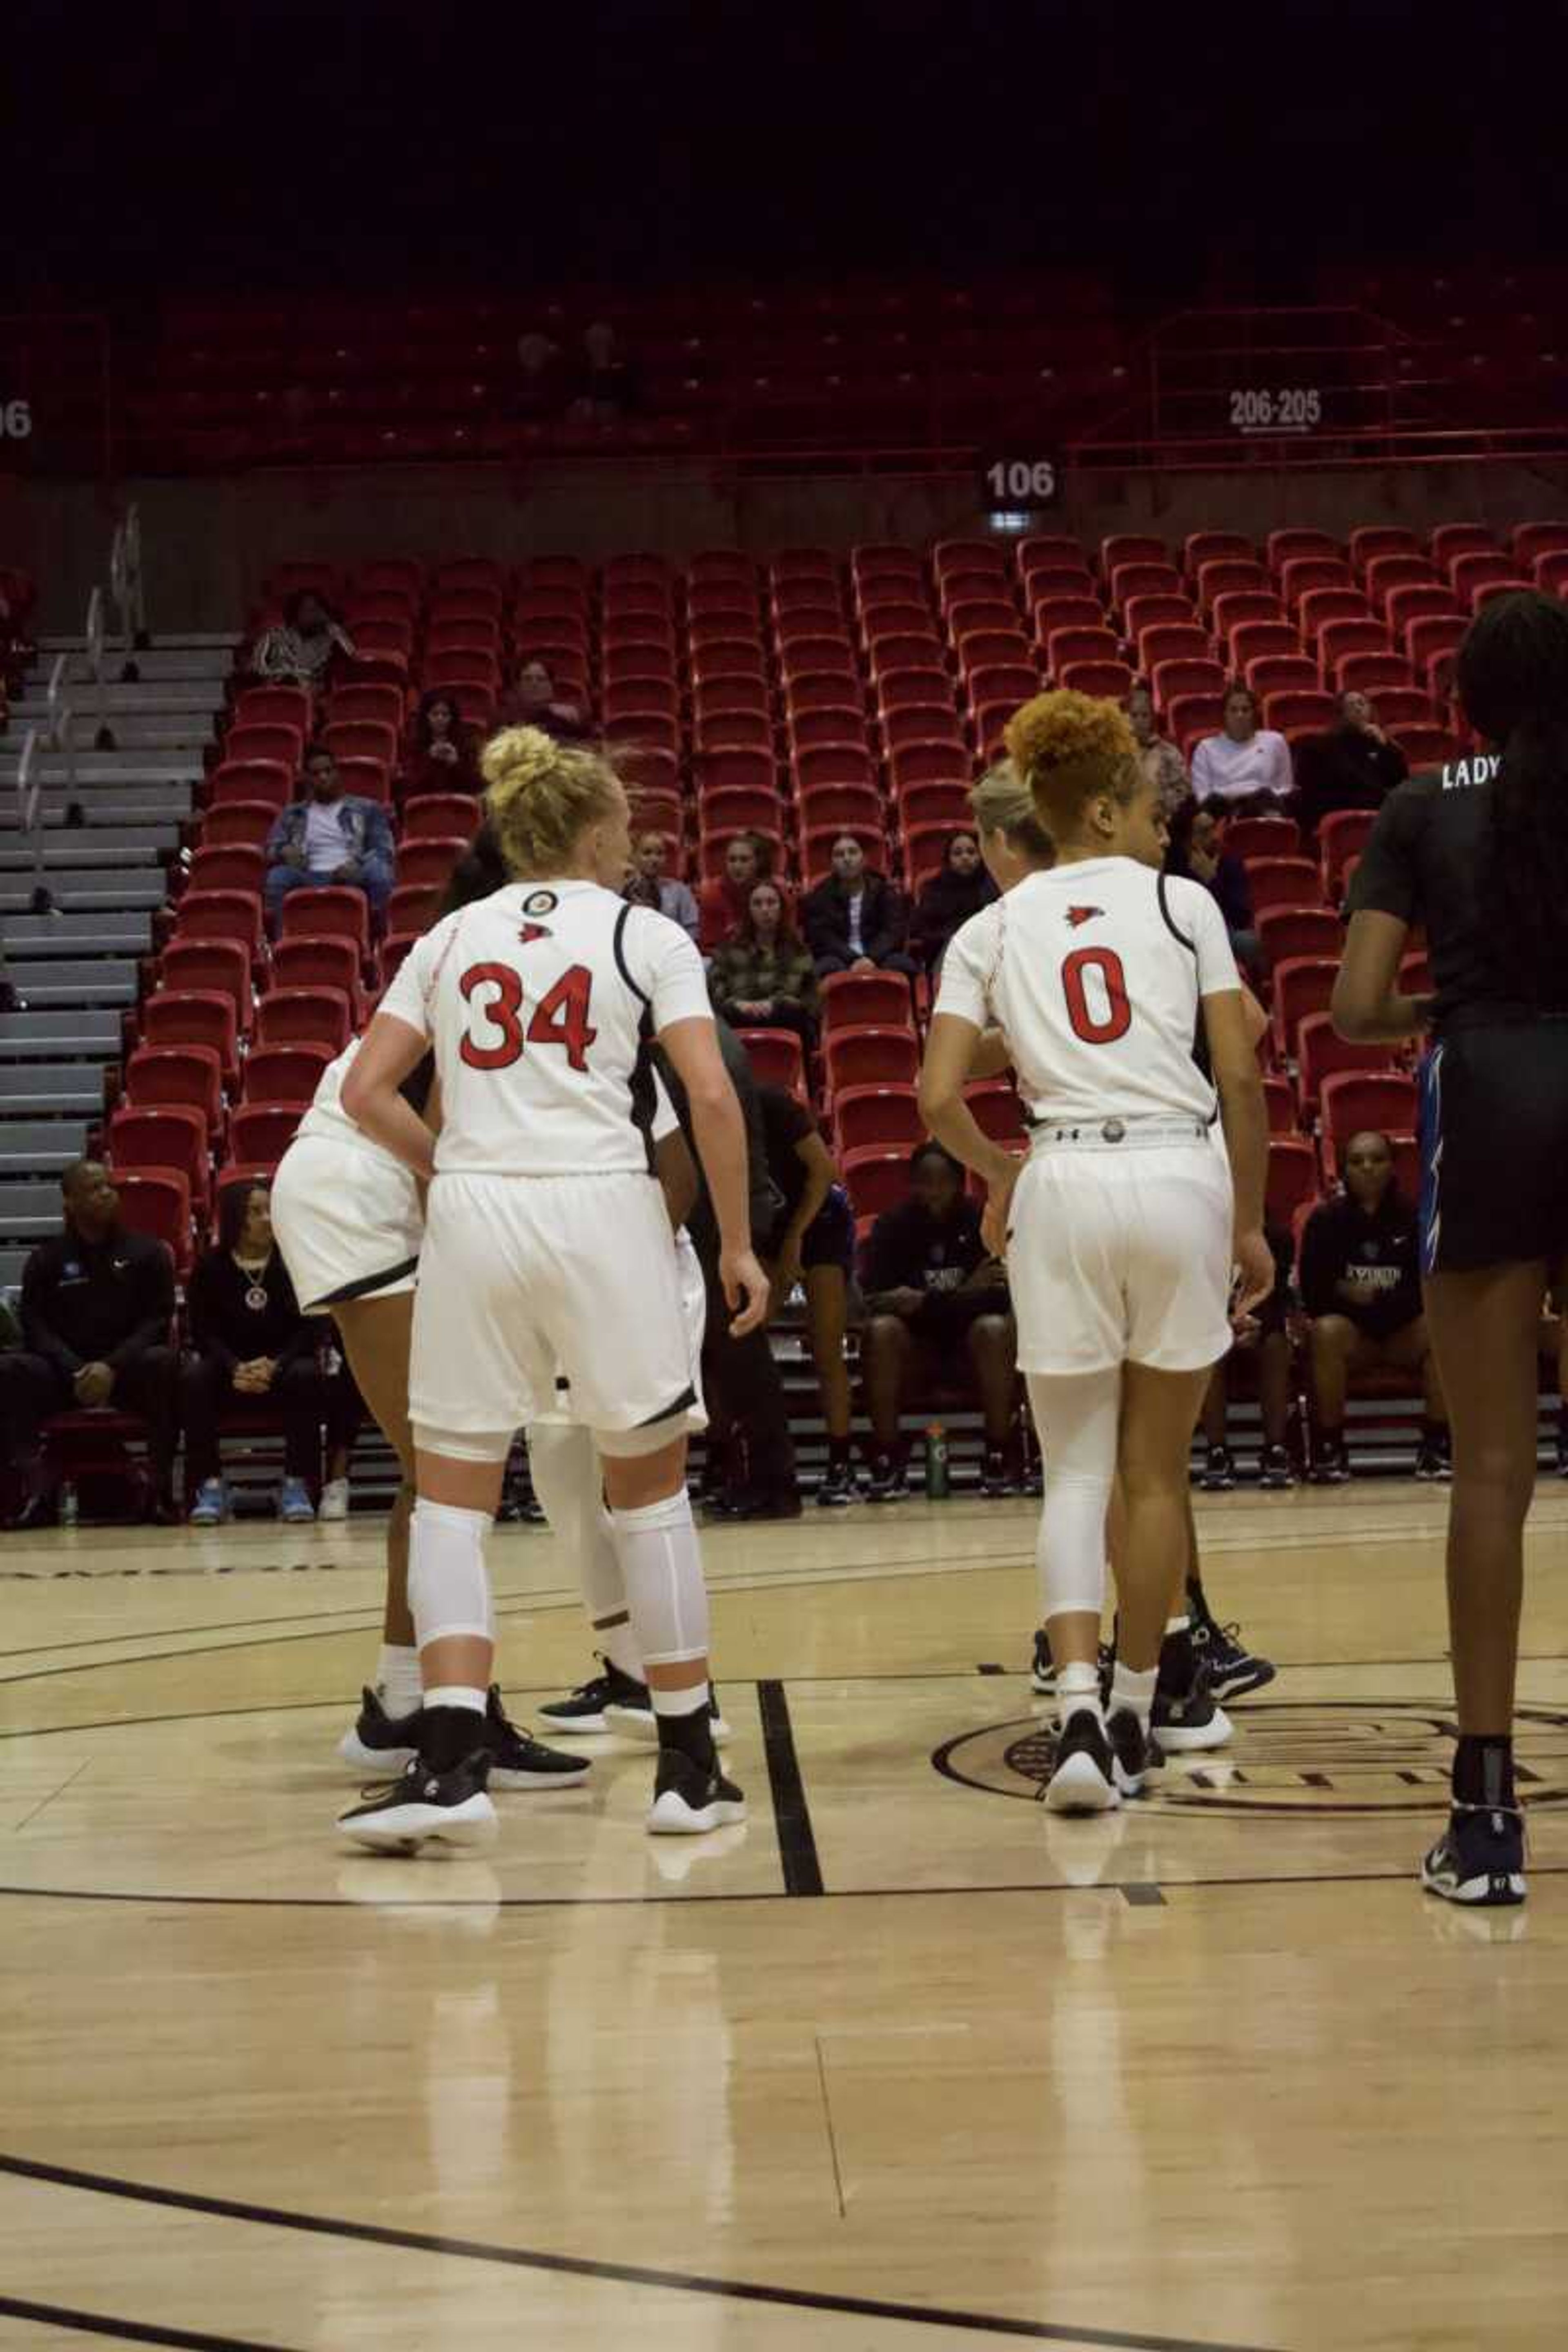 Redhawks guards Rahmena Henderson (right) and Sophie Bussard (left) lined up for a free throw. They scored a combined 31 points in the victory.